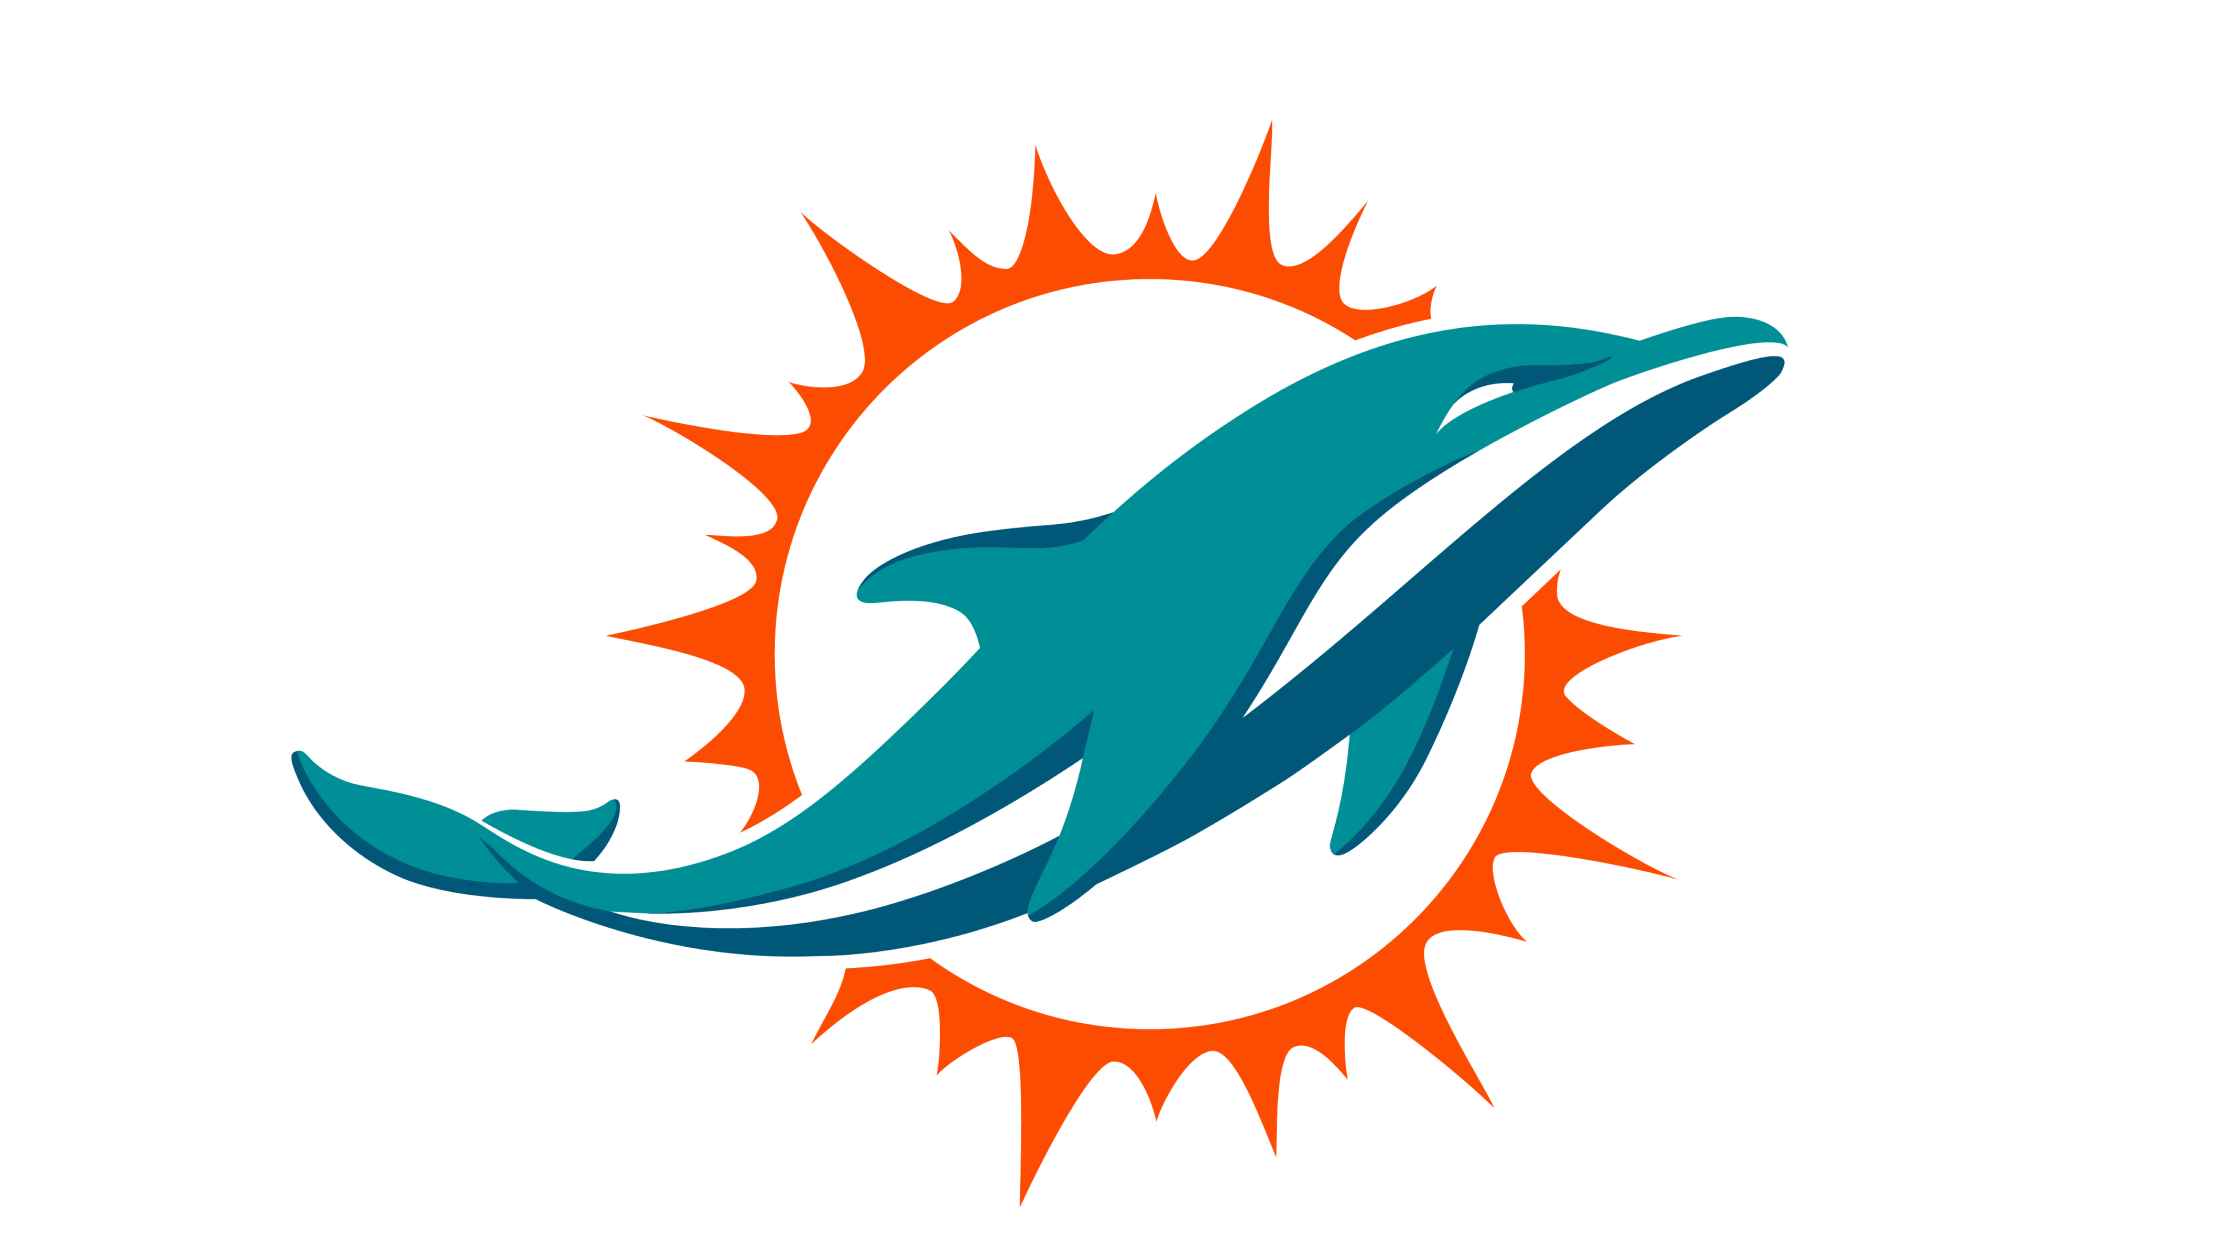 miami dolphins madden 23 ratings